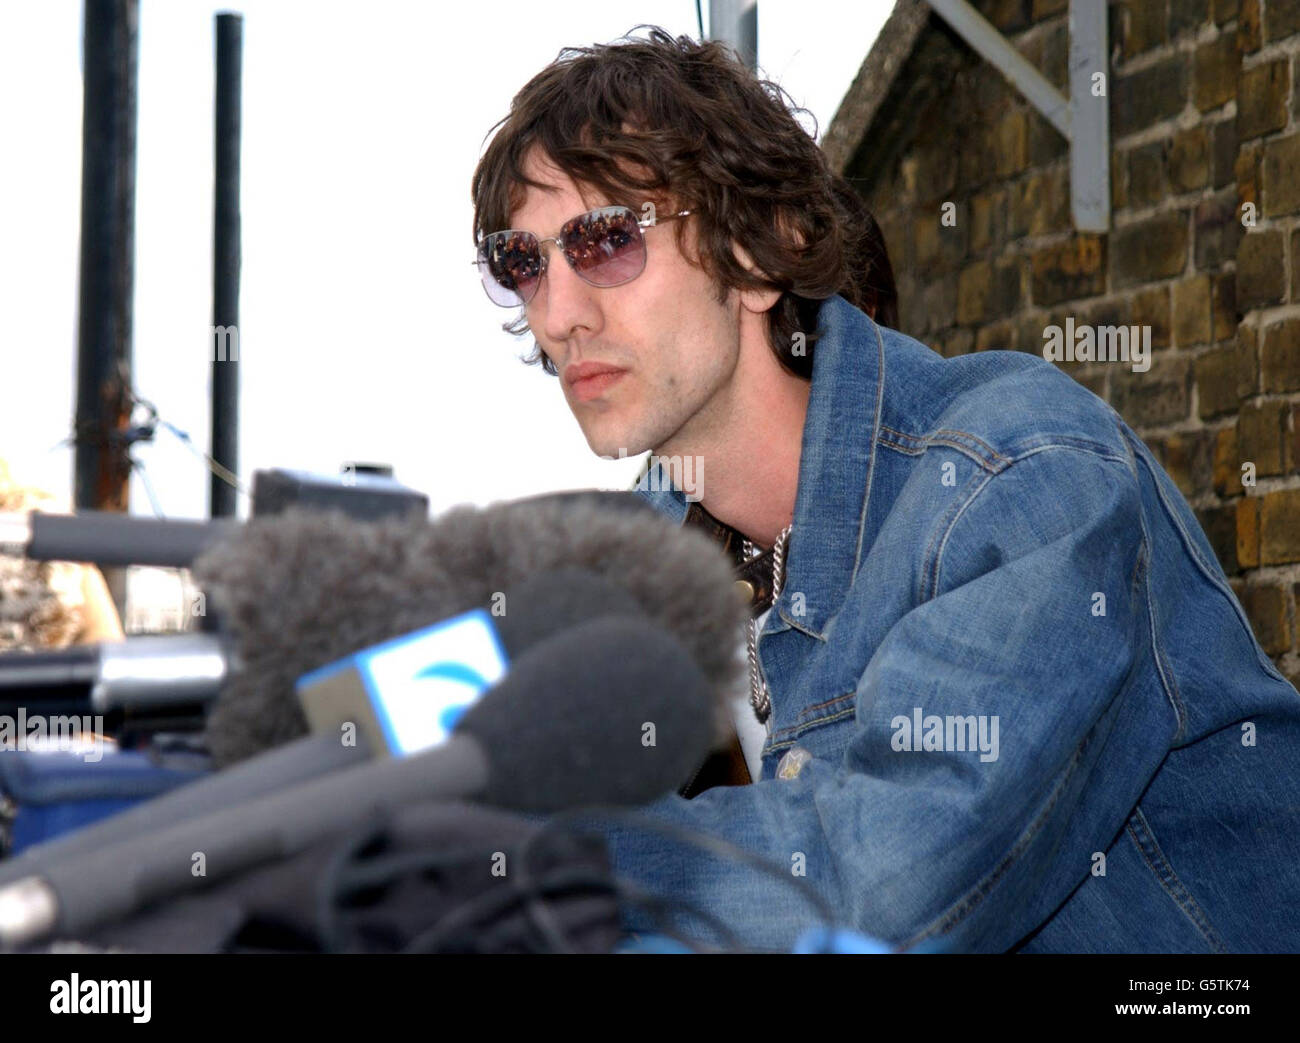 Singer Richard Ashcroft poses during a news conference in London prior to the 4Scott charity concert at the Scala in London. The fundraising concert for Marie Curie Cancer Care in memory of music plugger Scott Piering. Stock Photo